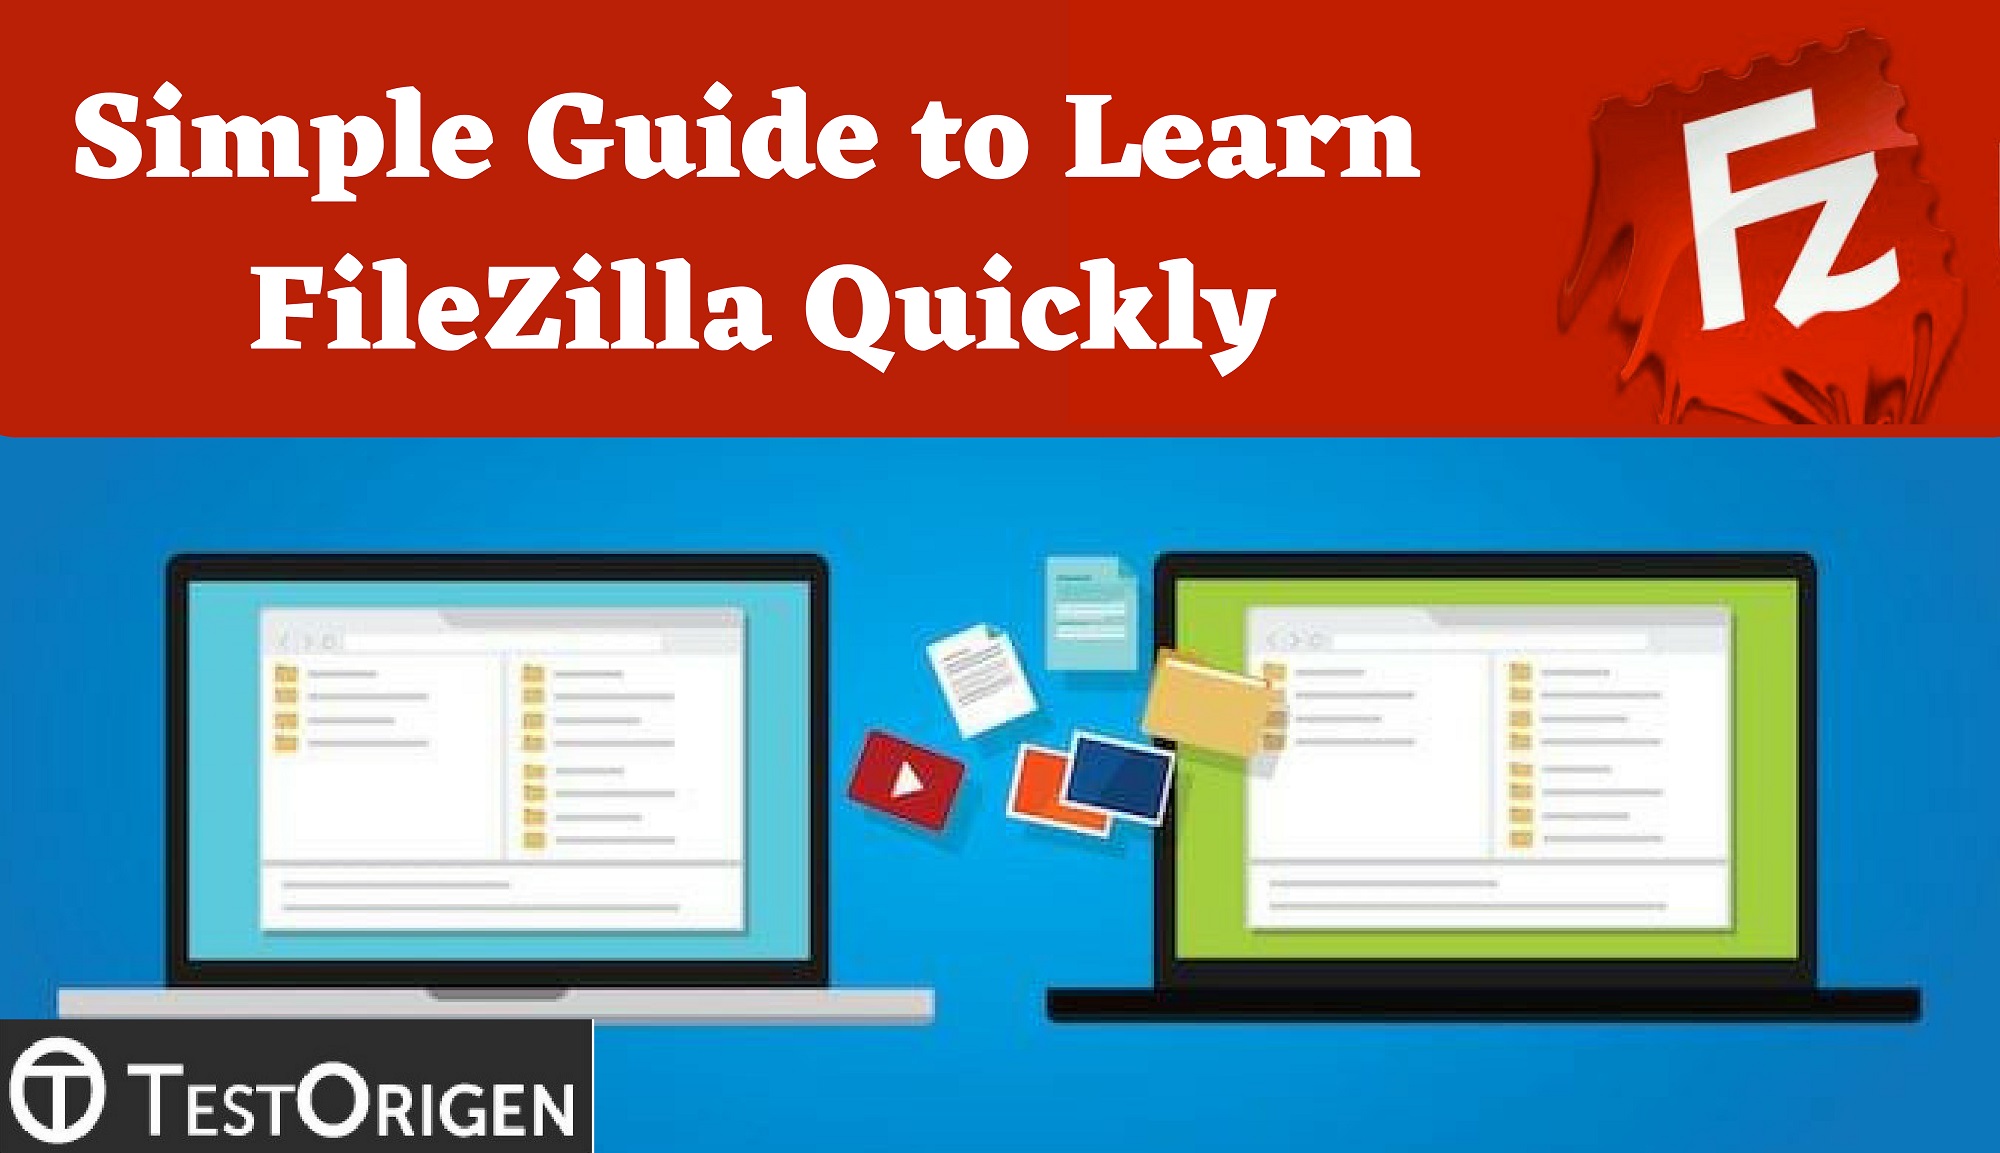 Simple Guide to Learn FileZilla Quickly